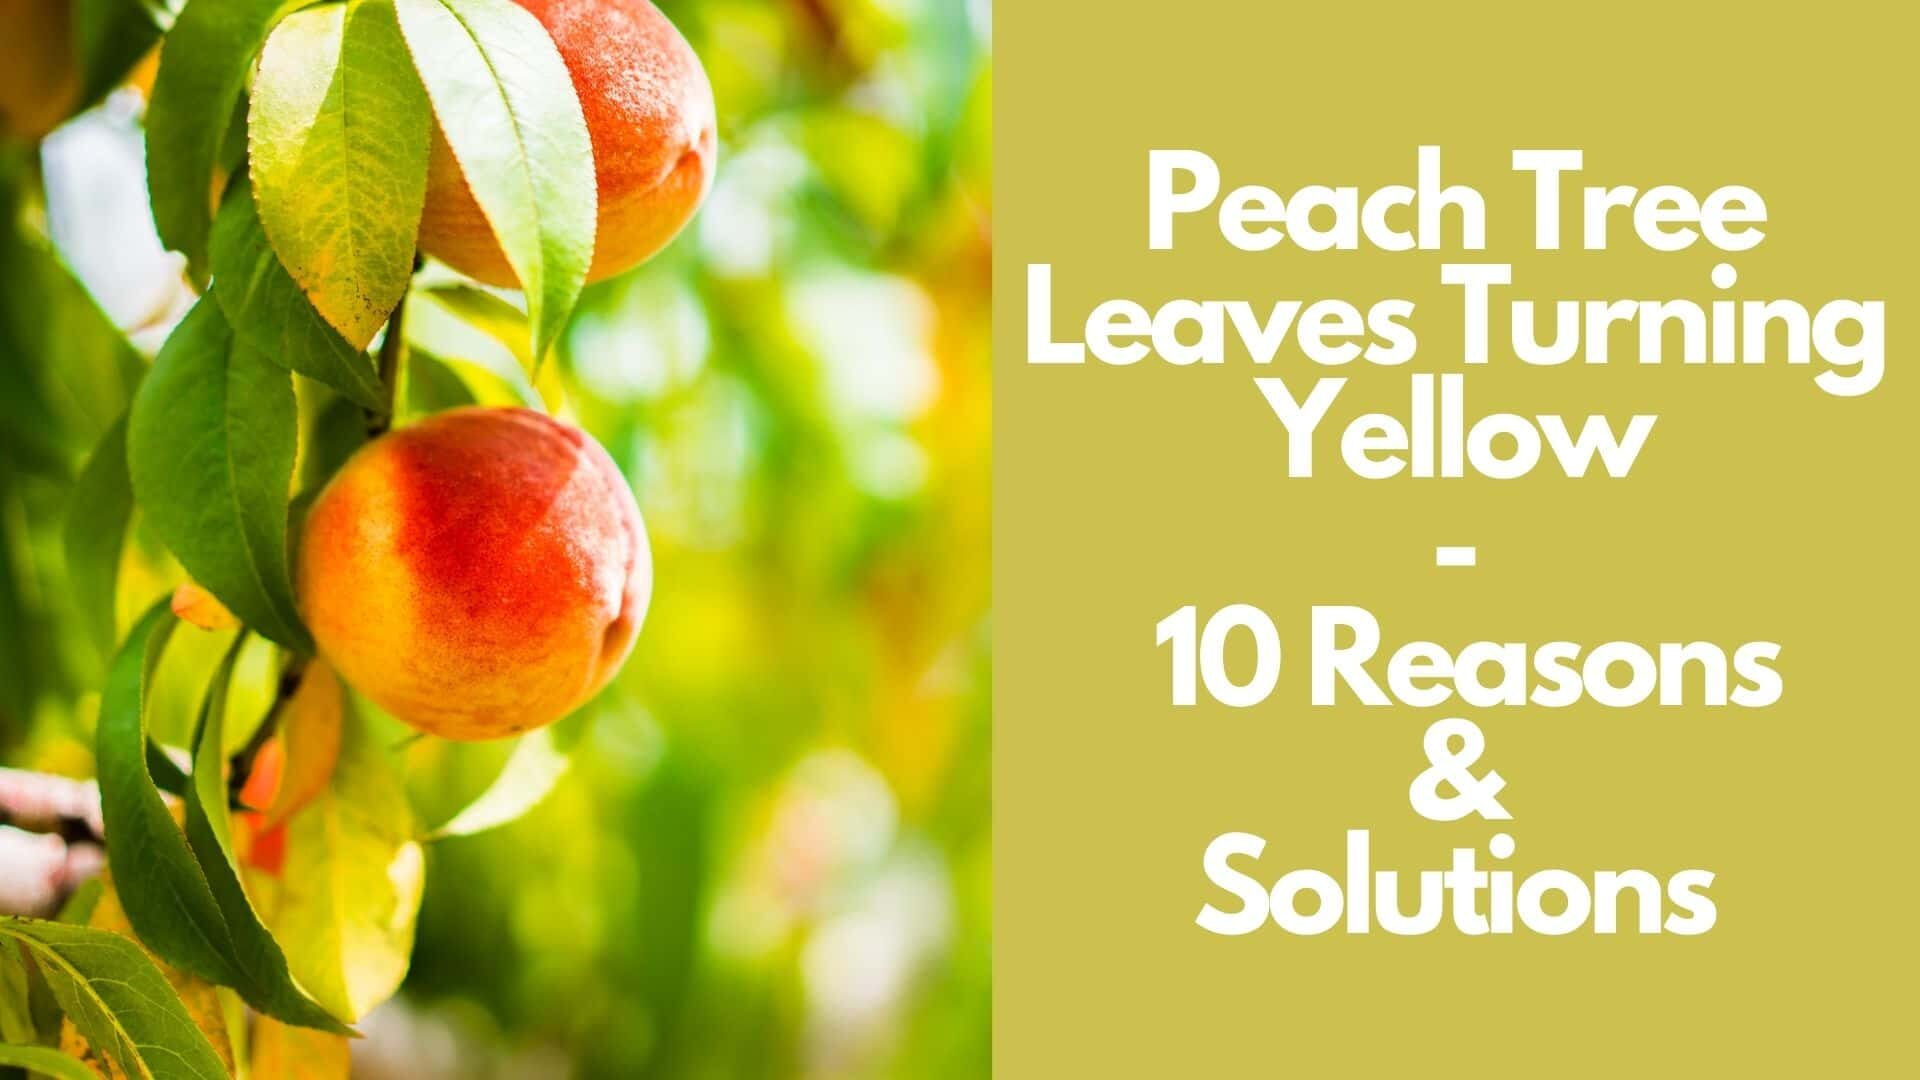 Peach Tree Leaves Turning Yellow: 10 Reasons & Solutions